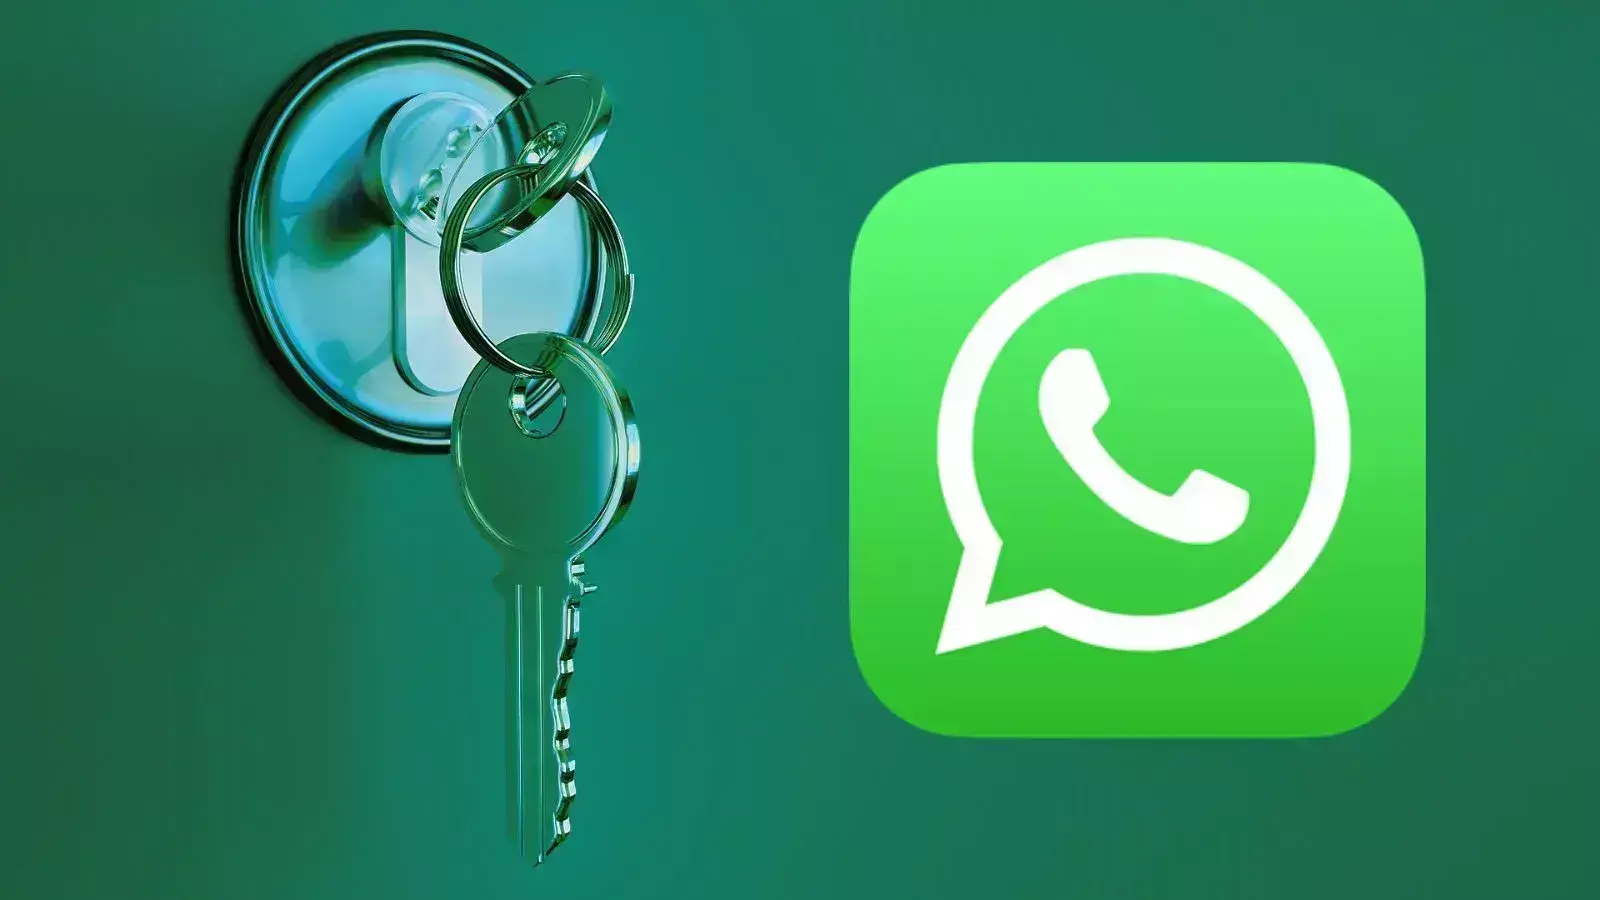 WhatsApp Update: WhatsApp Introduces Passkeys for iOS, Secure Logins Without Passwords